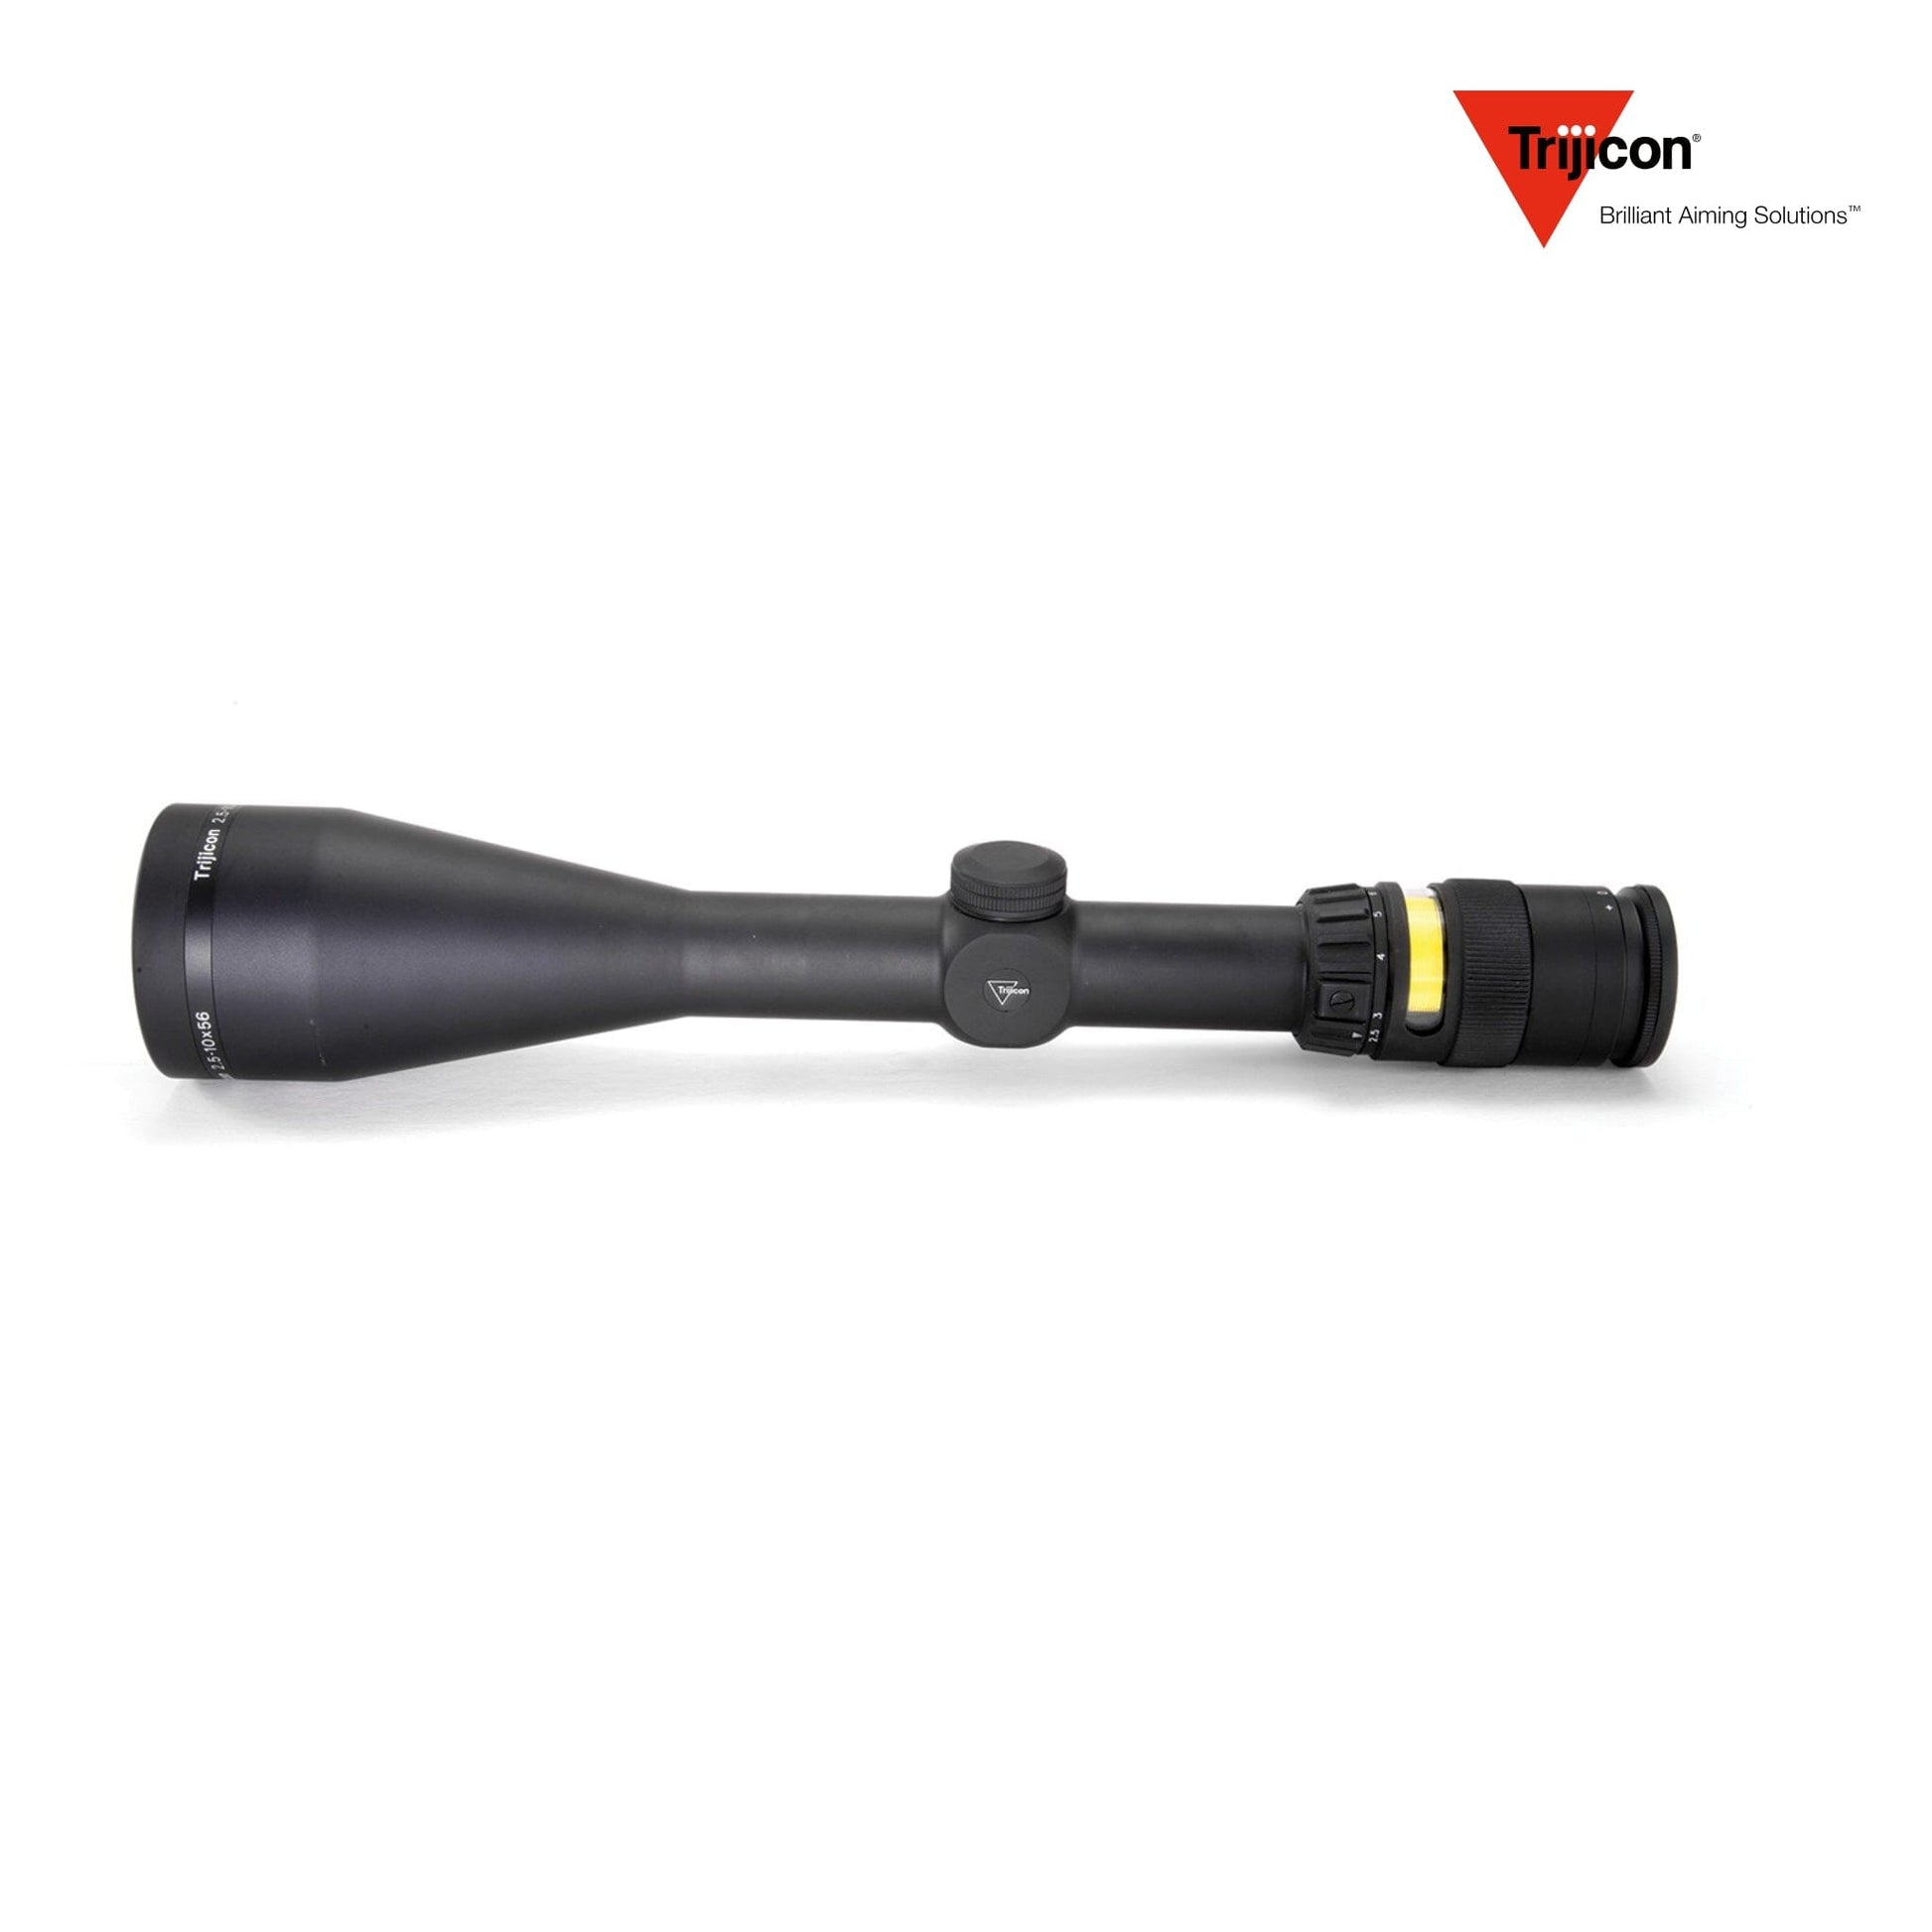 Trijicon AccuPoint 2.5-10x56 Rifle Scope MIL-Dot Crosshair with Amber Dot Reticle TR22-2 Rifle Scope Trijicon 